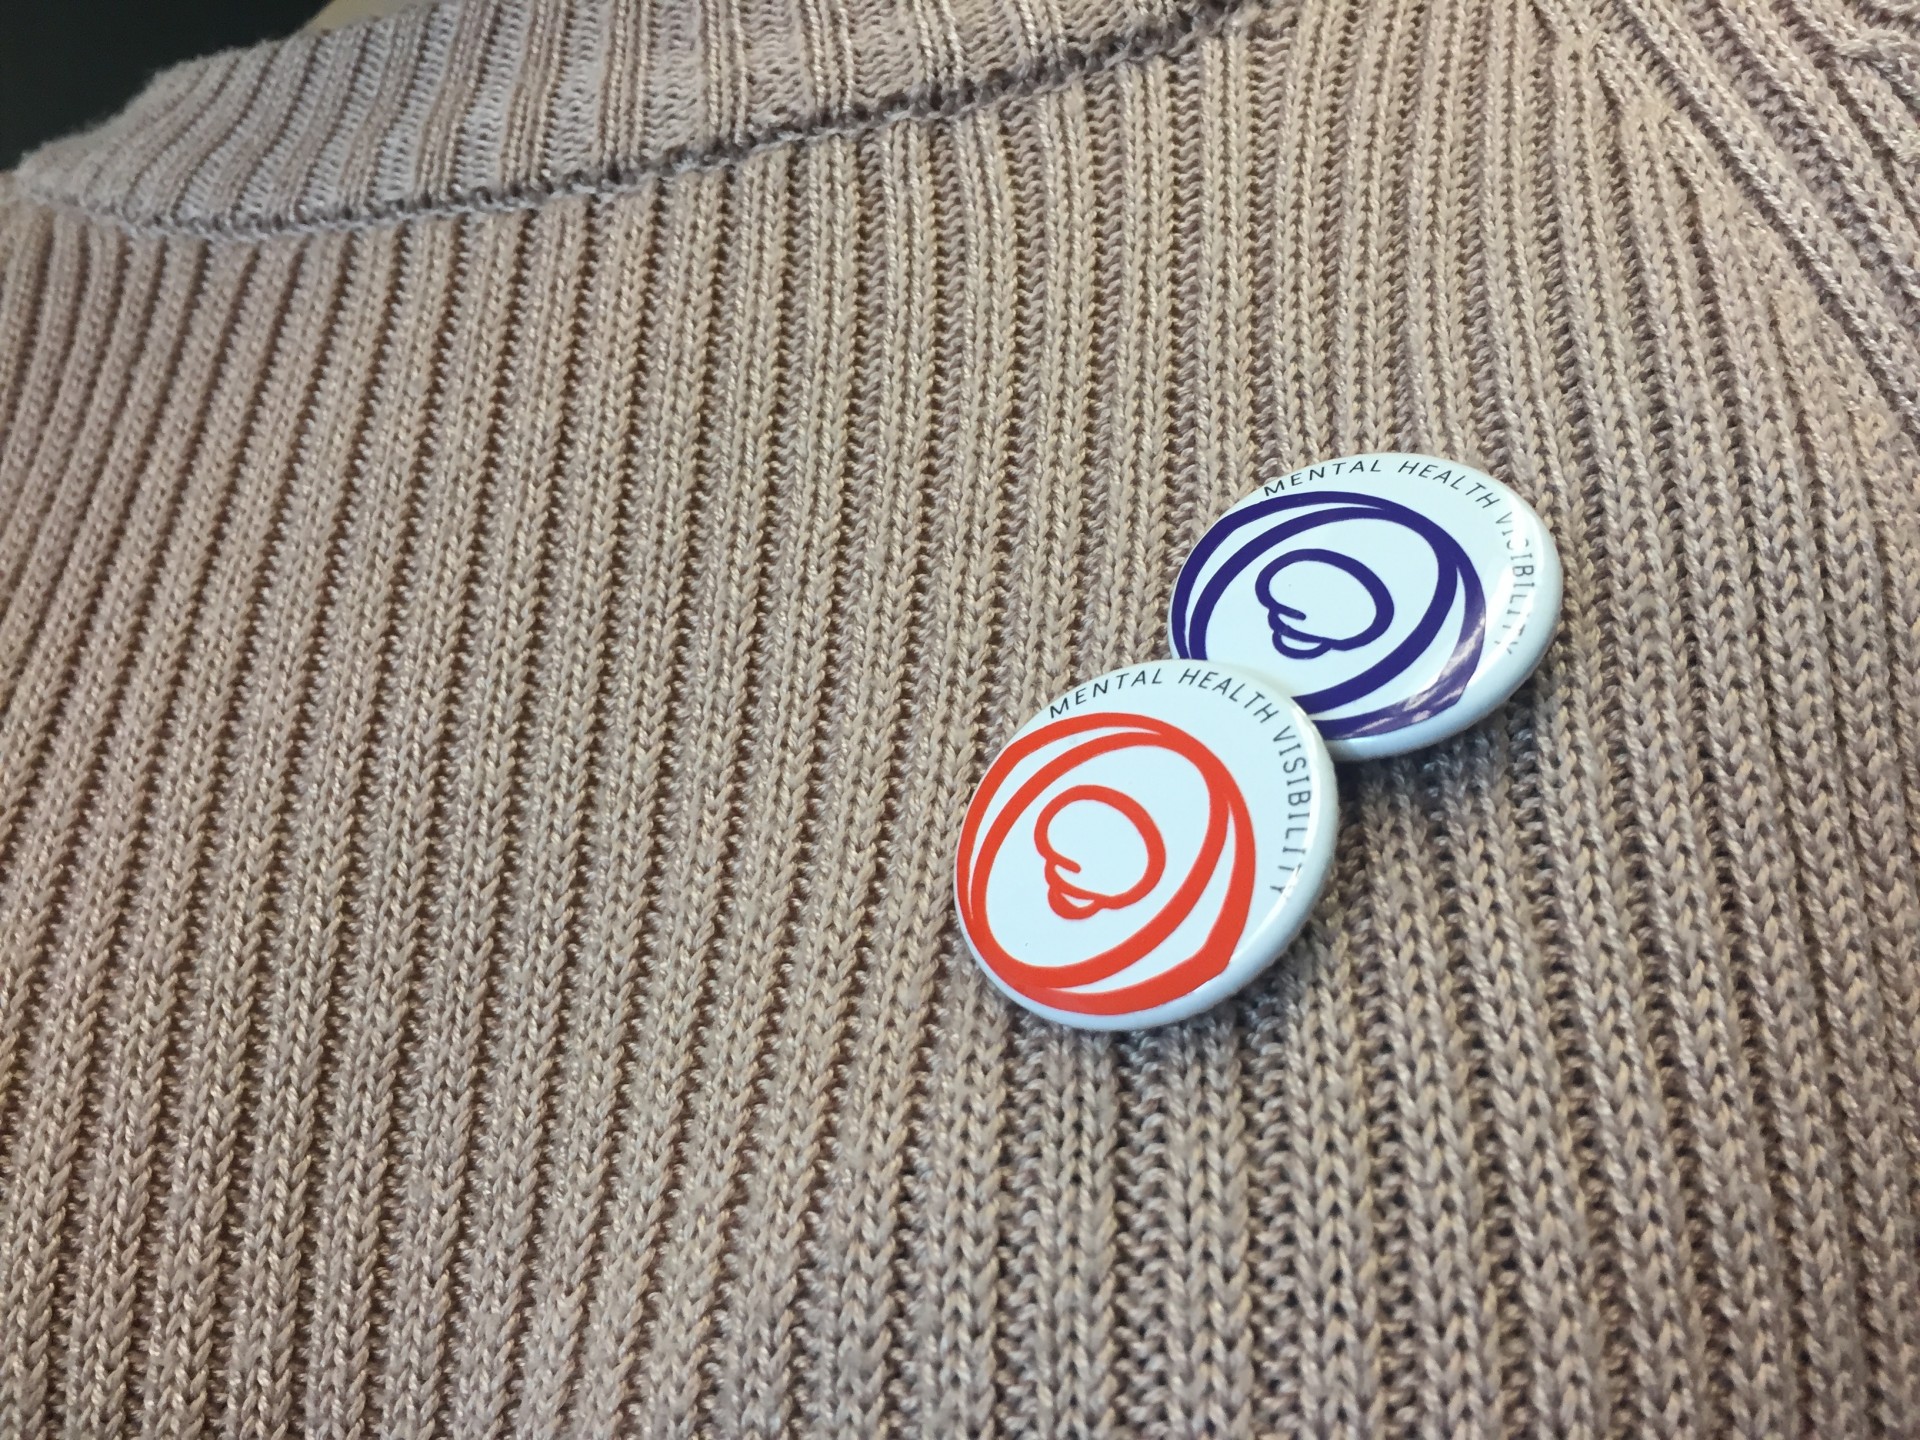 Pins for Anxiety Disorders (orange) and Obsessive-Compulsive and Related Disorders (purple)